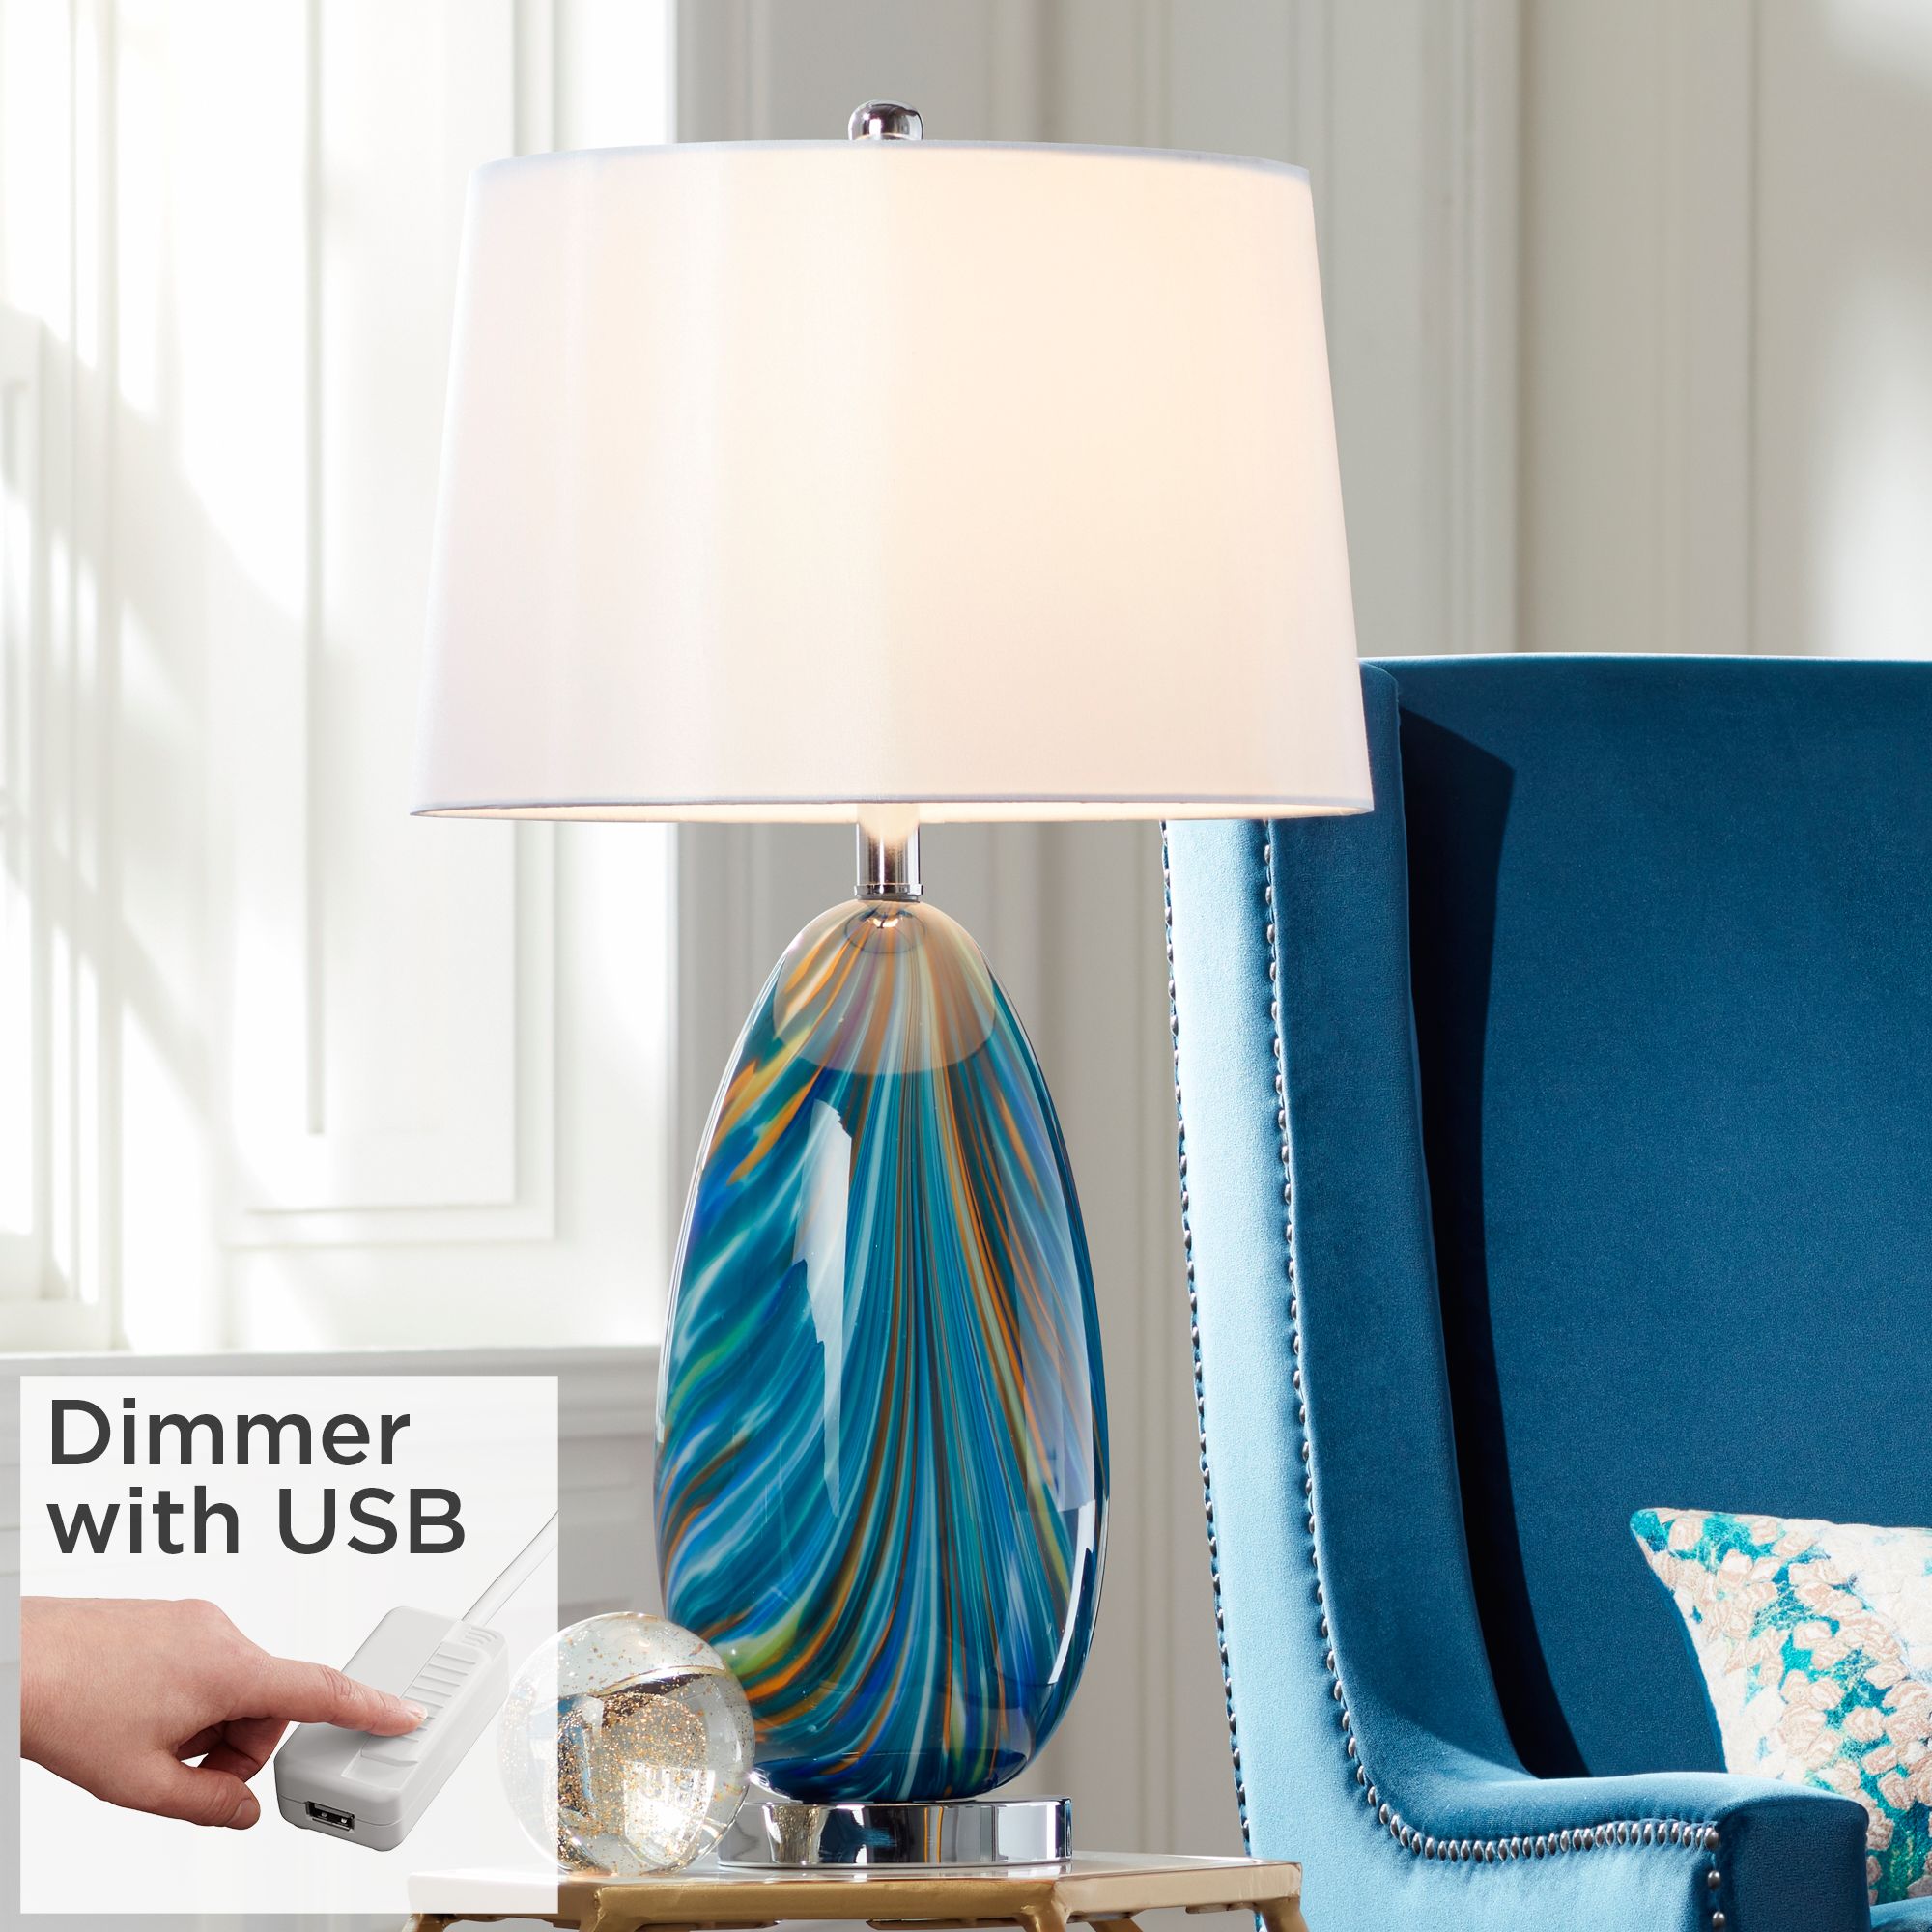 Possini Euro Pablo Blue Art Glass Table Lamp with Dimmer with USB Port